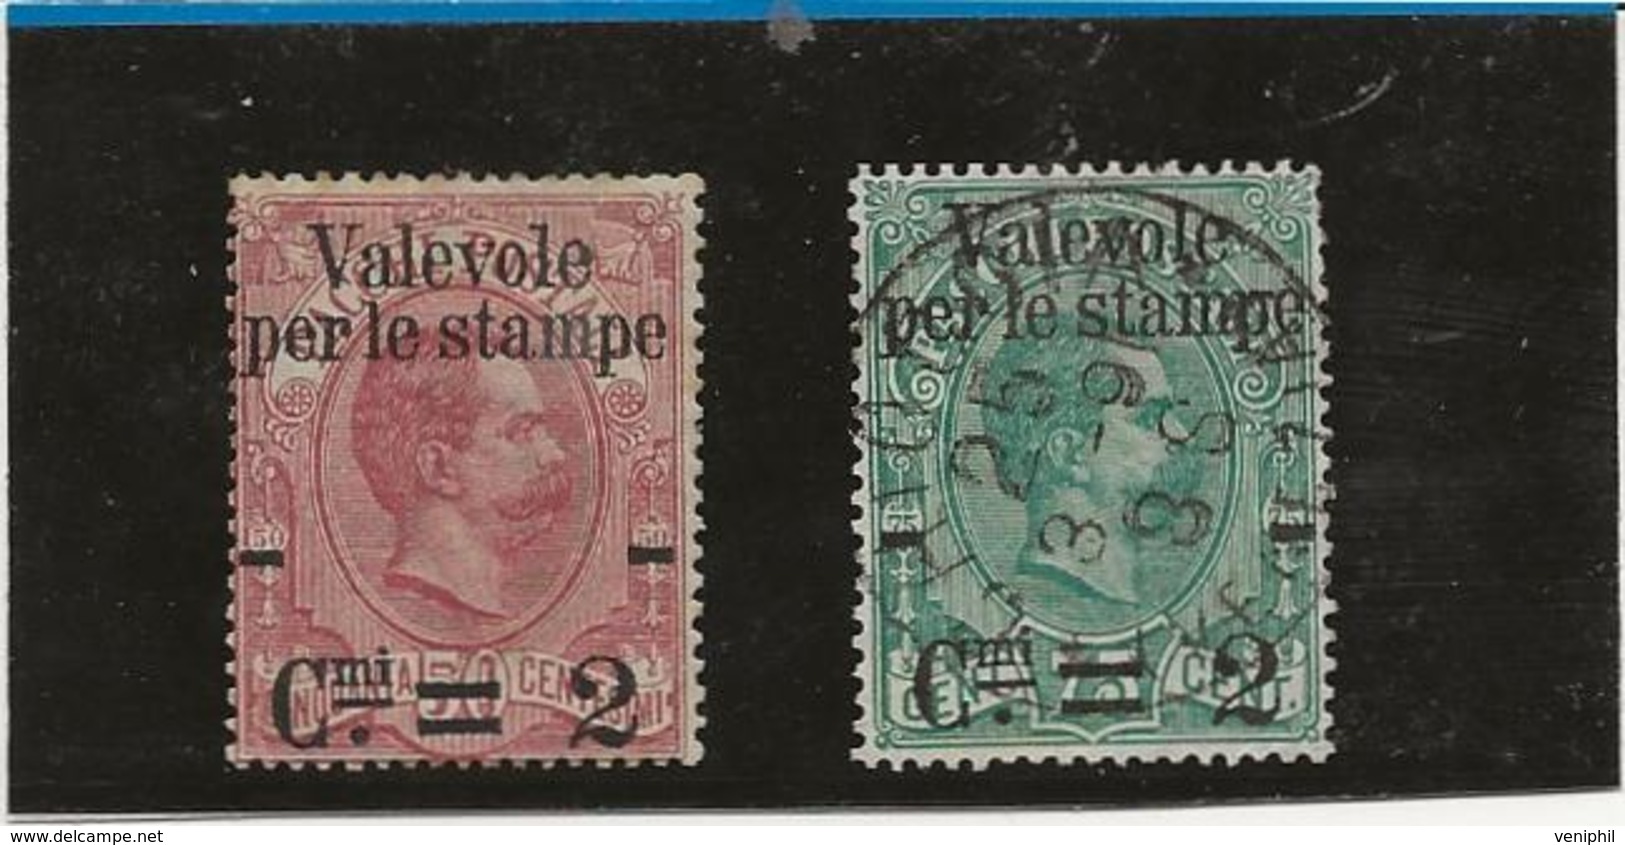 TIMBRES N° 48 NEUF S GOMME + N° 49 OBLITERE - ANNEE 1890 - COTE : 40 € - Used